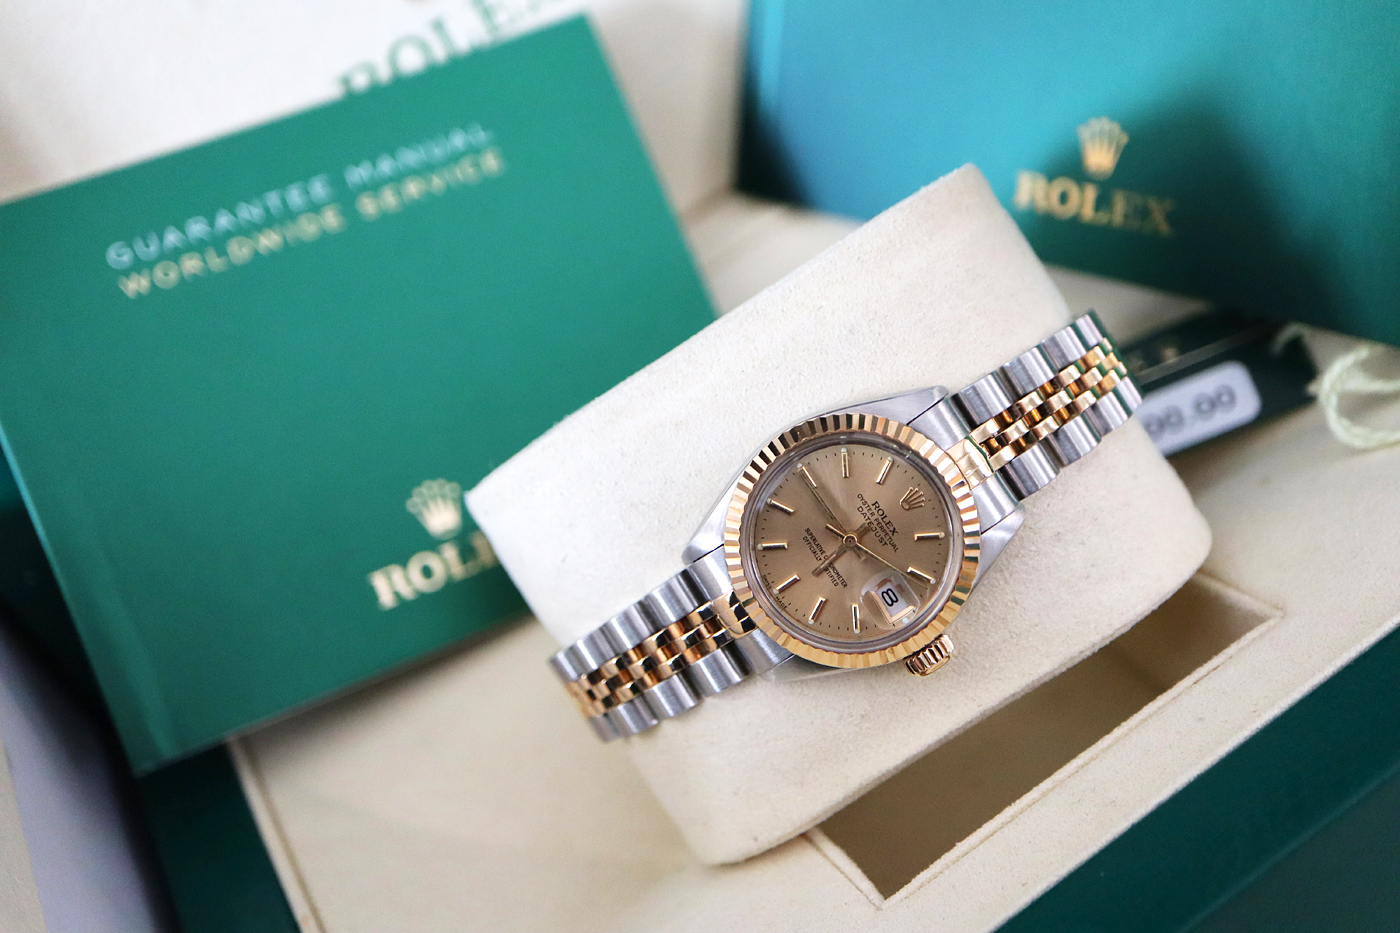 ROLEX DATEJUST 18K / STEEL *CHAMPAGNE* - BOX SET / BOOKLETS / TAGS - Image 12 of 13